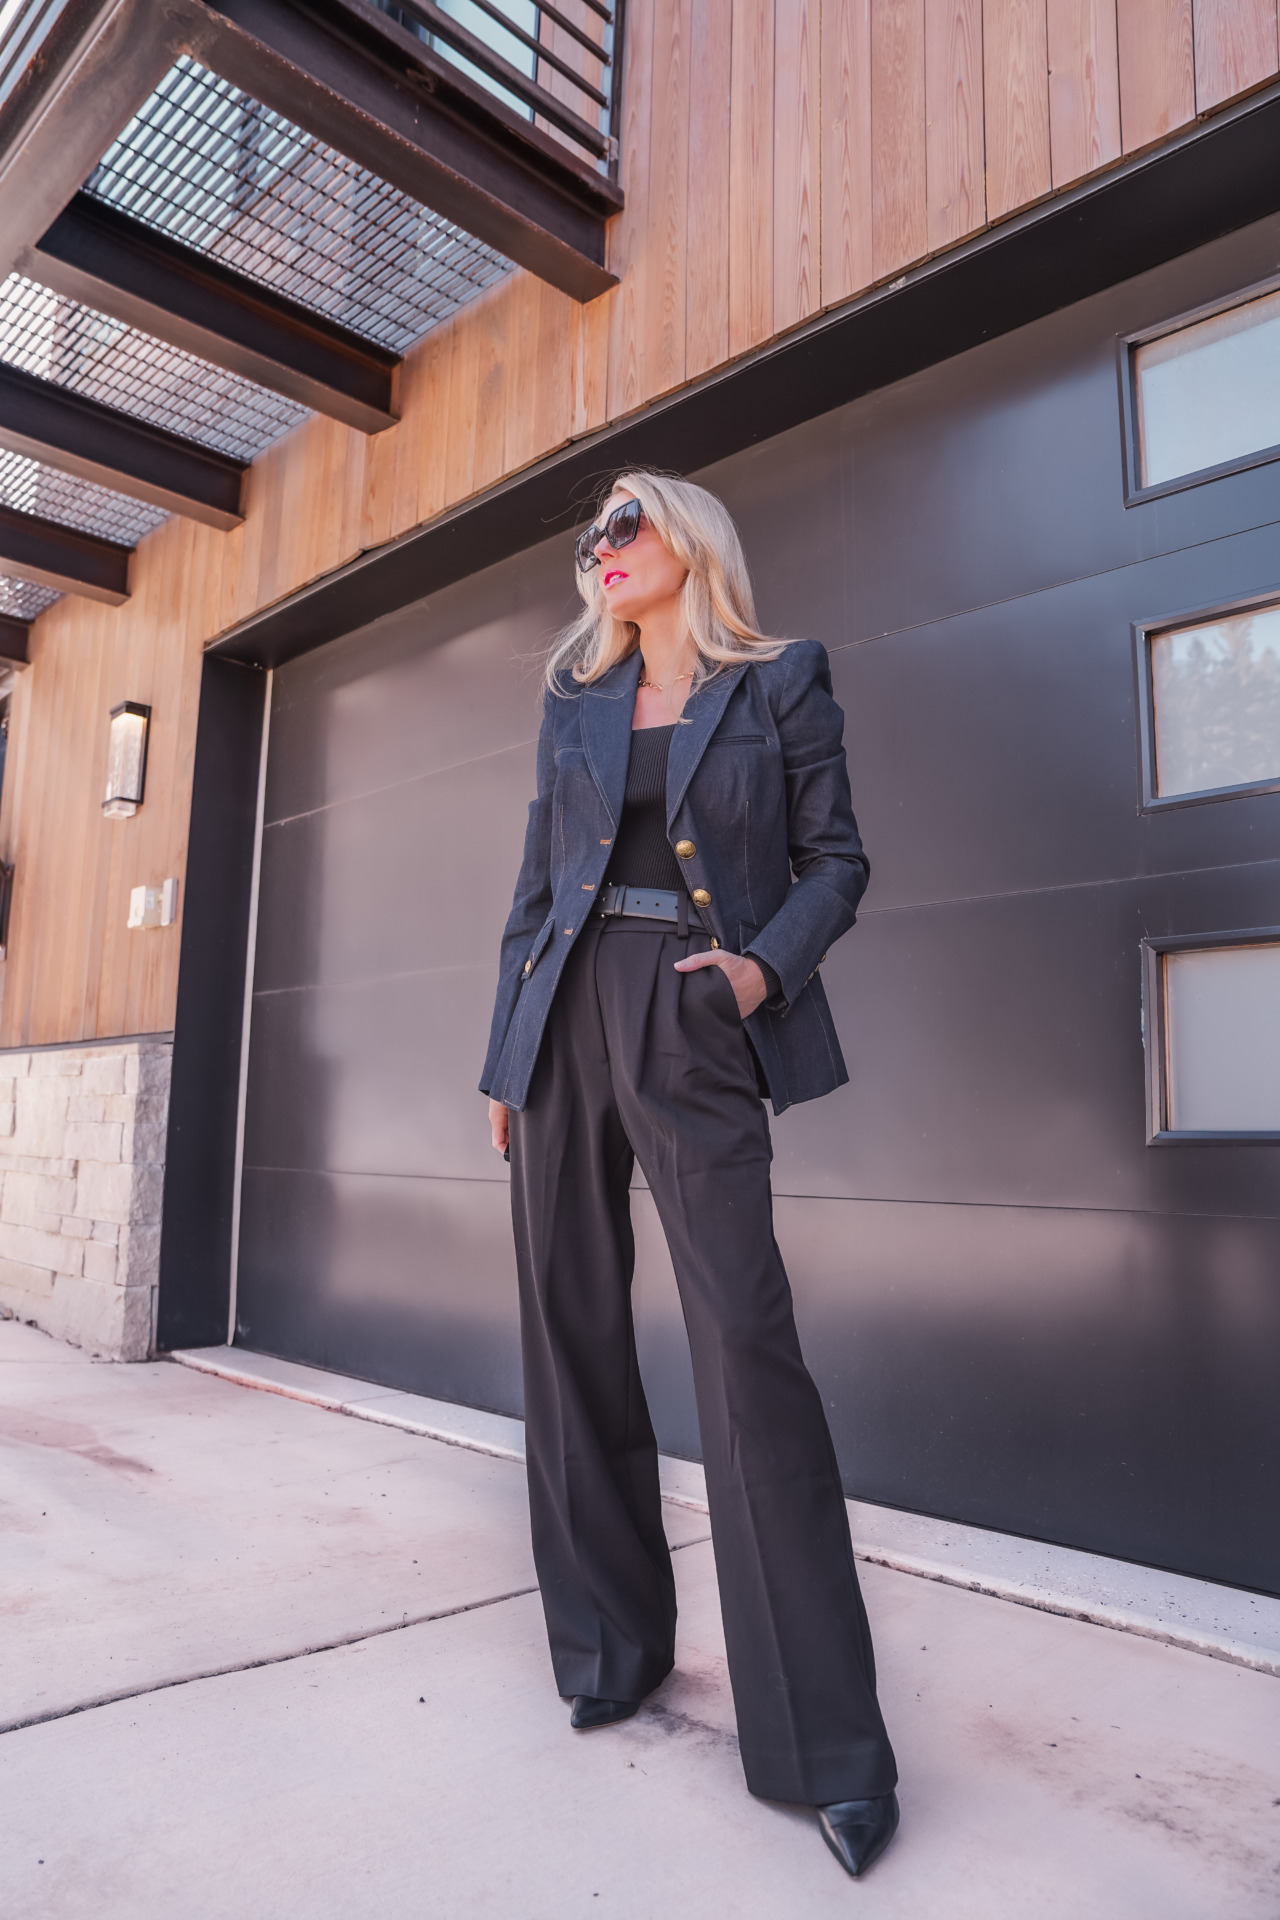 how to style wide leg pants: Wide-Leg Pants Work Outfit